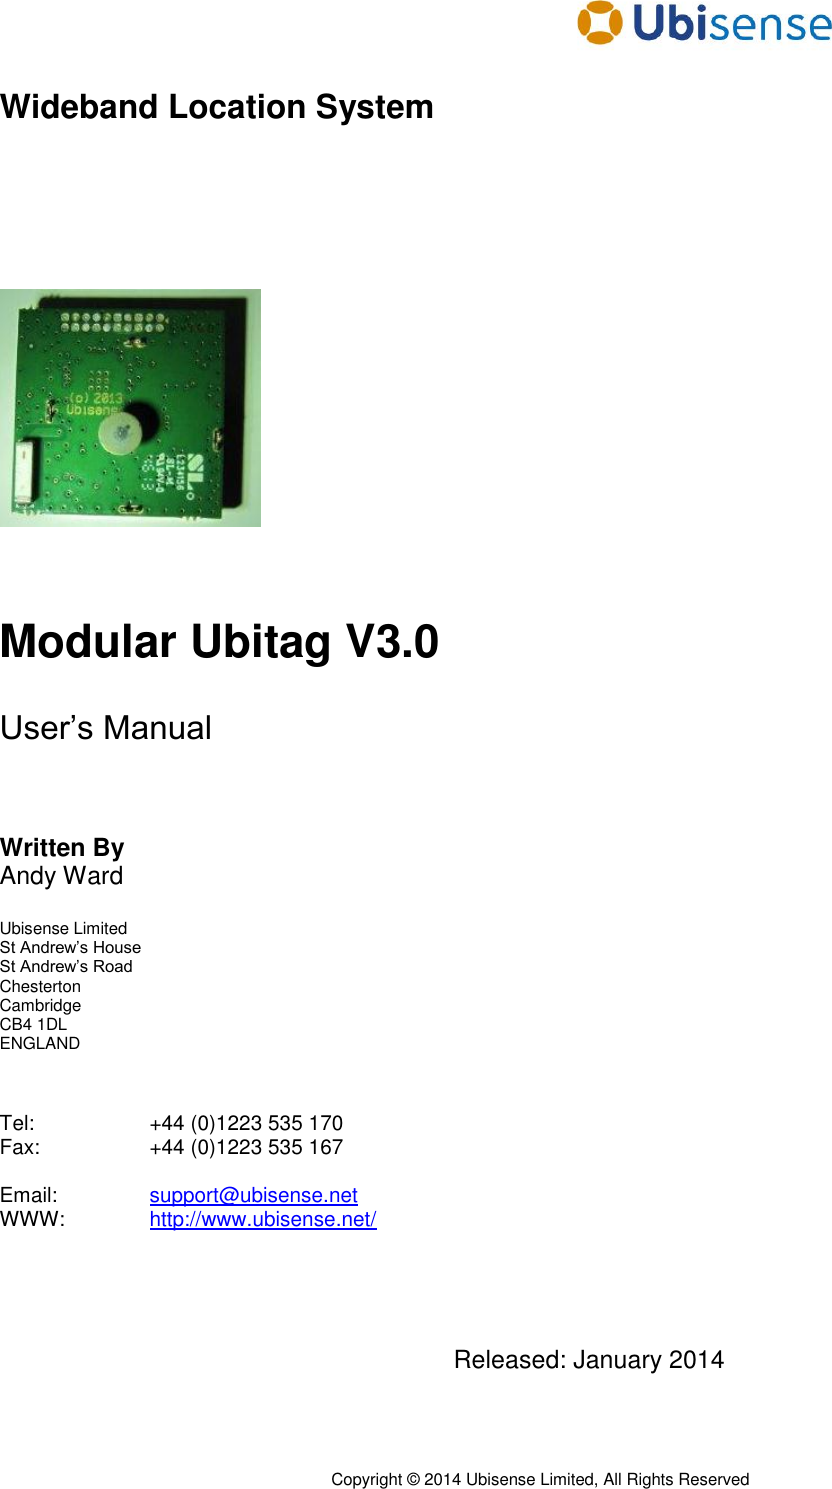      Copyright © 2014 Ubisense Limited, All Rights Reserved Wideband Location System        Modular Ubitag V3.0  User’s Manual    Written By Andy Ward  Ubisense Limited St Andrew’s House St Andrew’s Road Chesterton Cambridge CB4 1DL ENGLAND    Tel:     +44 (0)1223 535 170 Fax:     +44 (0)1223 535 167  Email:     support@ubisense.net WWW:    http://www.ubisense.net/     Released: January 2014  